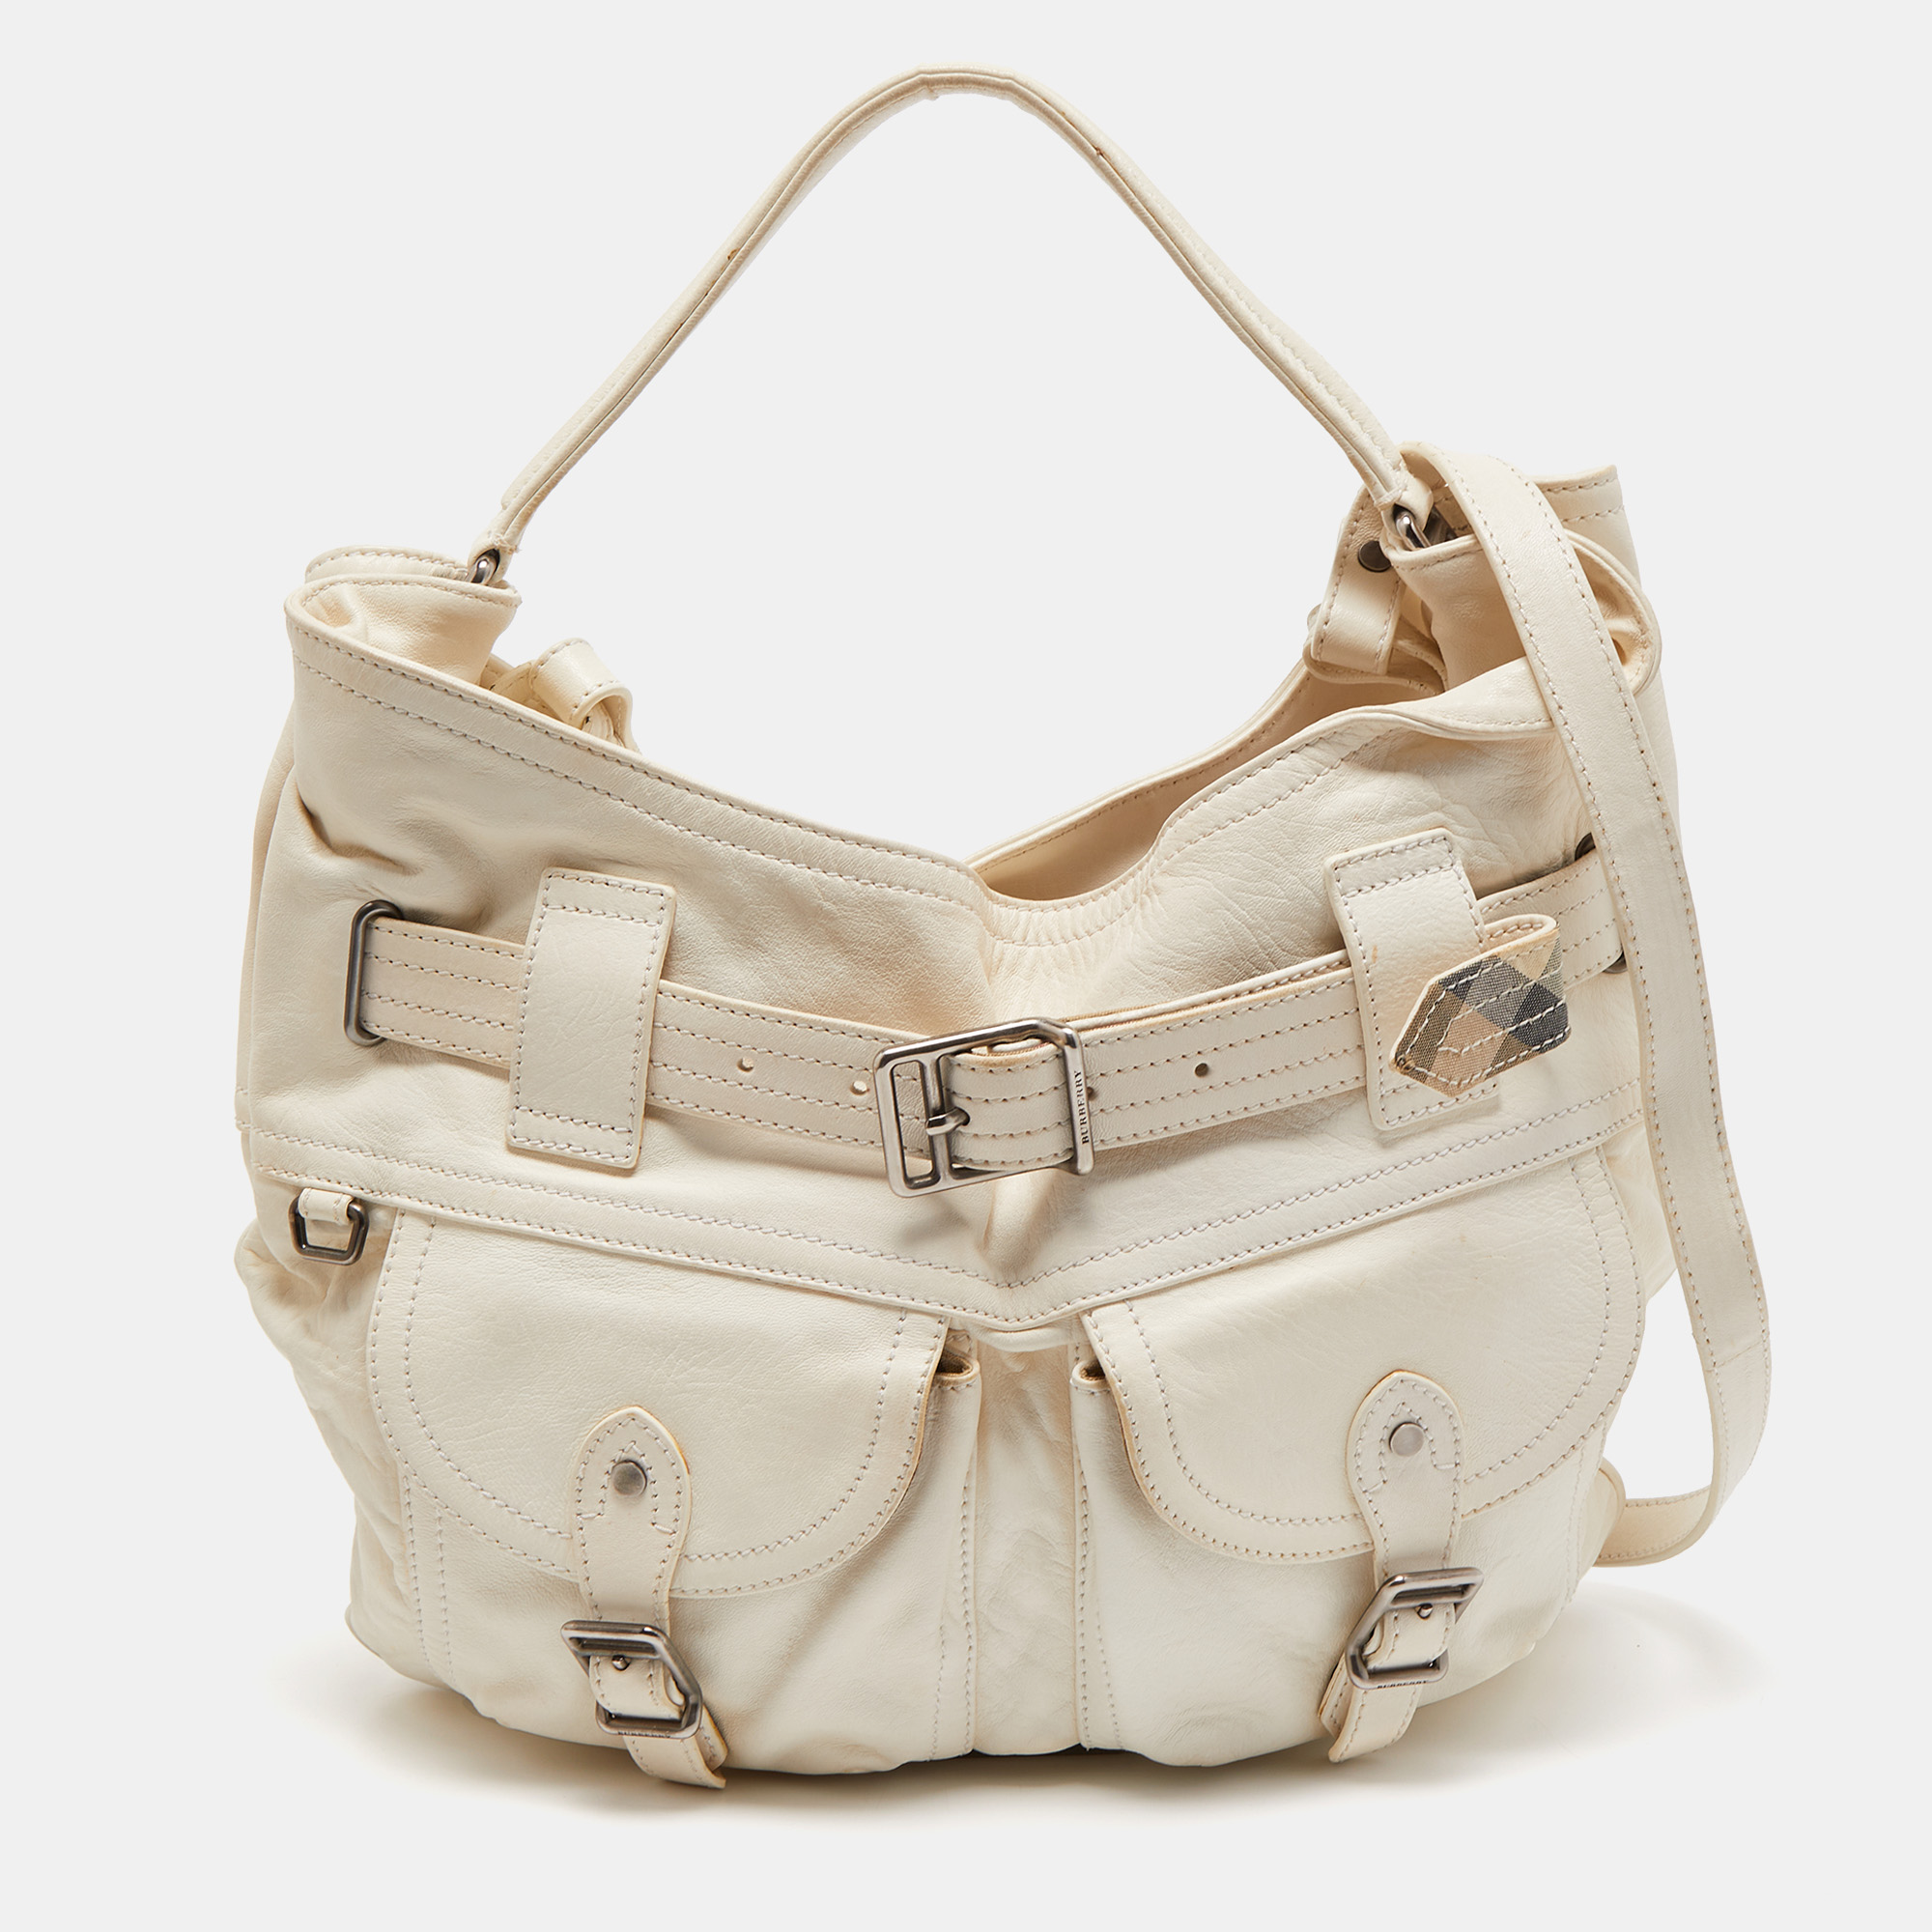 Burberry White Leather Crompton Shoulder Bag Burberry | TLC